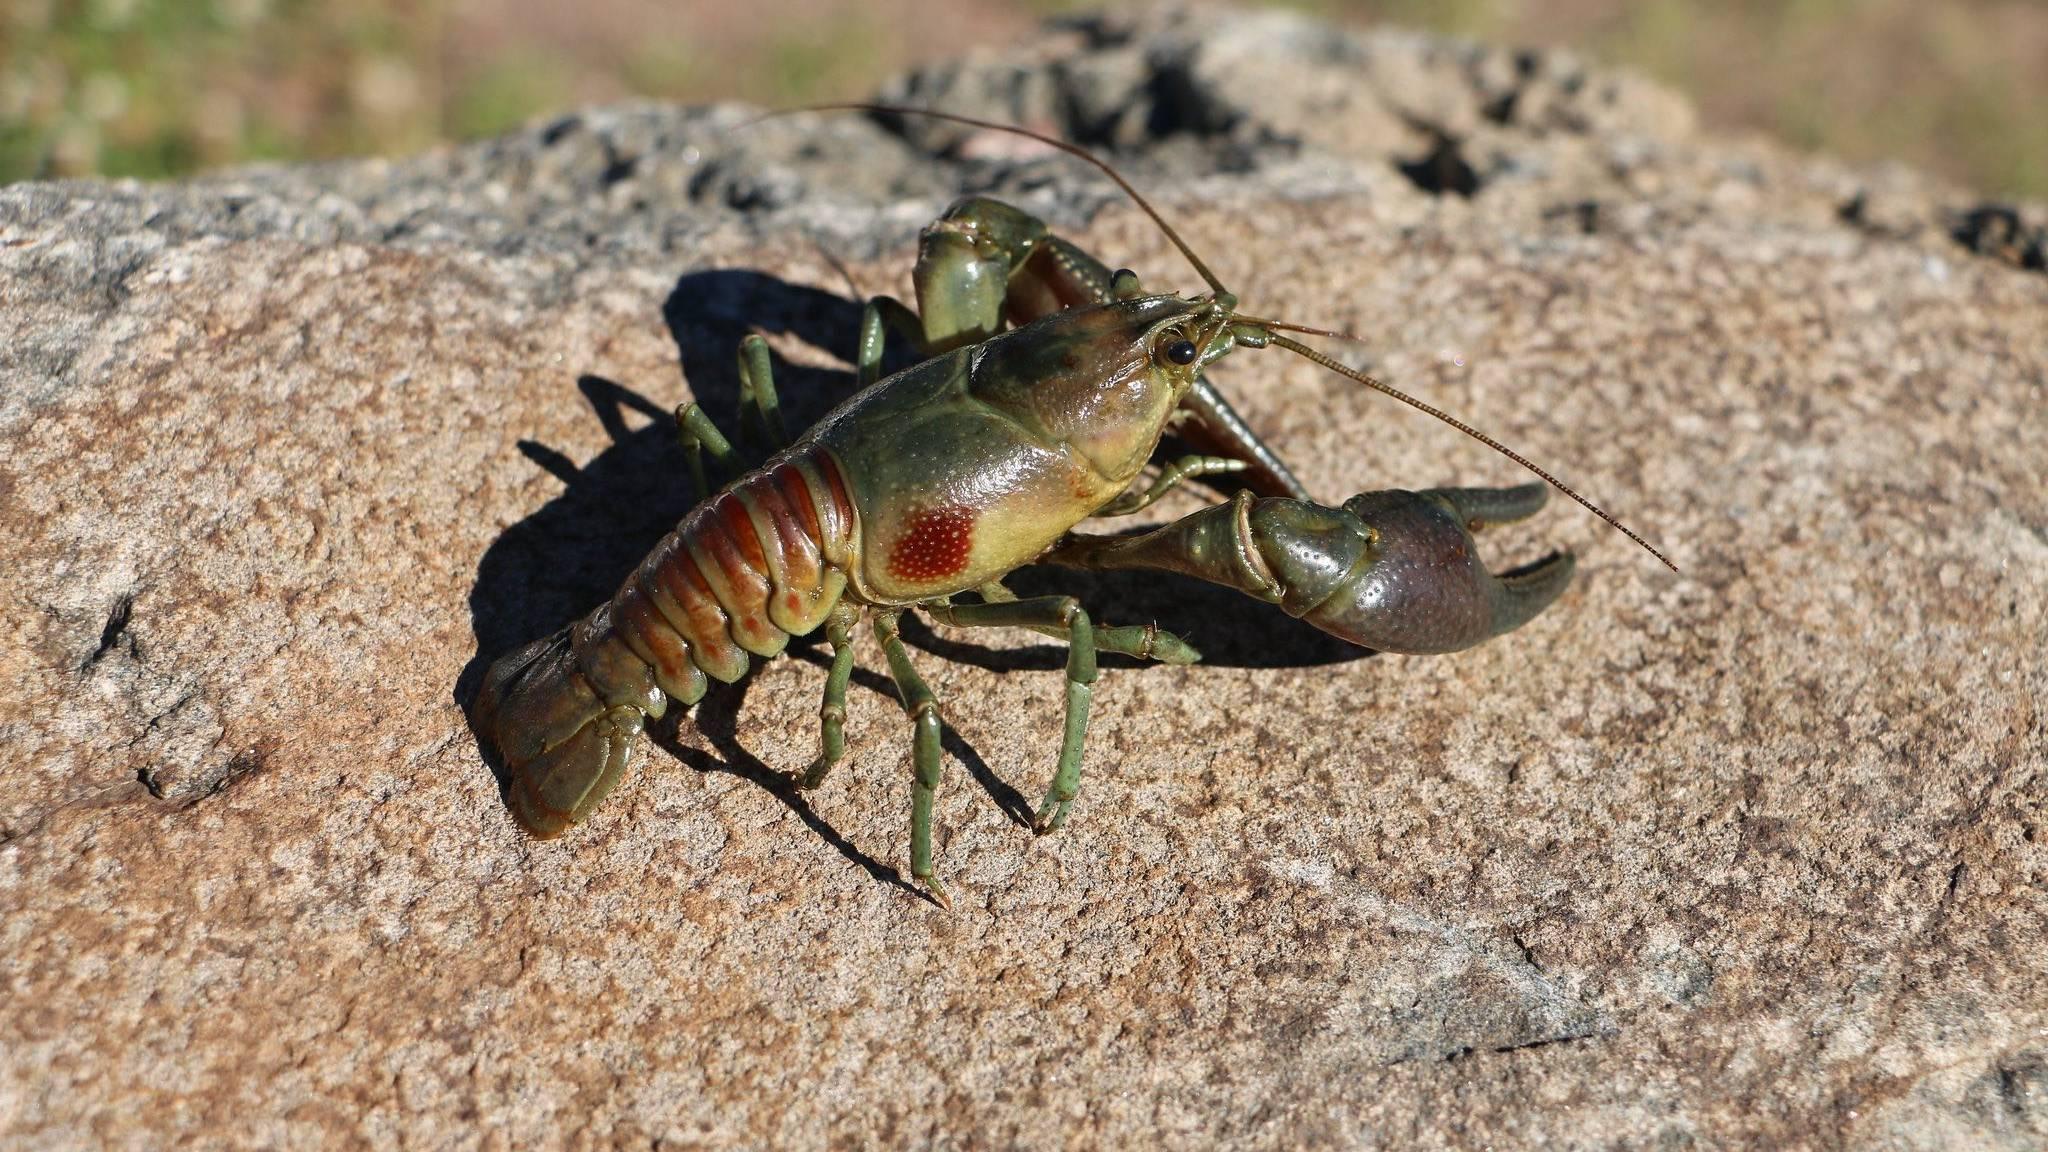 The rusty crayfish is native to the Ohio River basin. (Flickr Creative Commons)